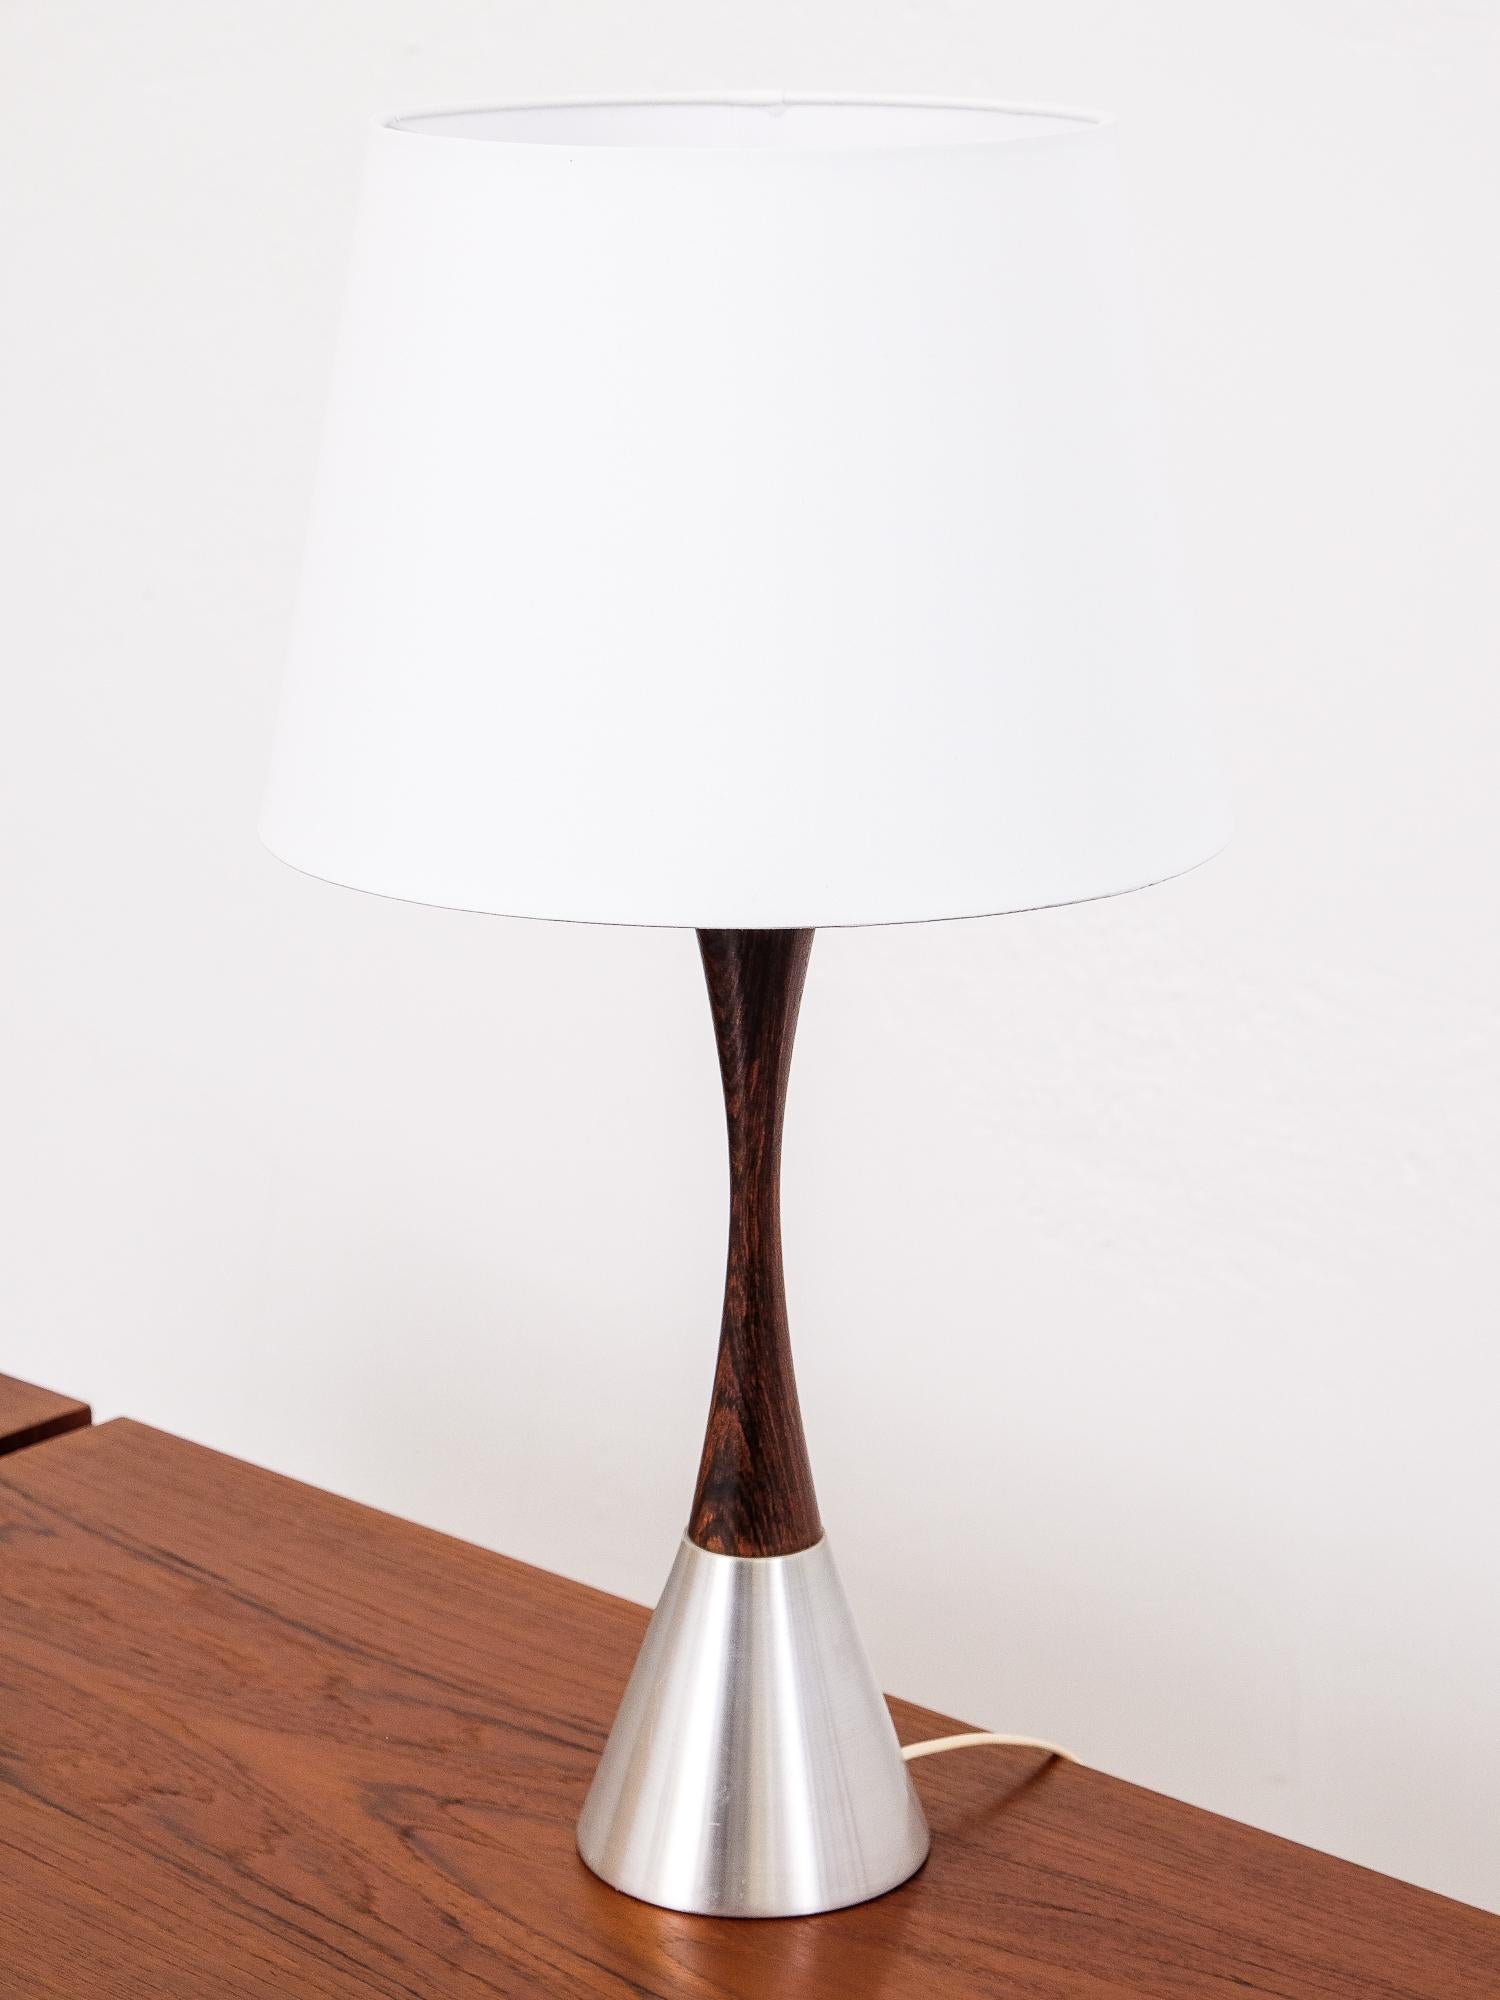 Rare table lamp by Bergboms, Sweden, 1960s. The lamp is made of rosewood and brushed metal. Design of this lamp is simple and elegant and the wood and the metal make a beautiful contrast.

Height with shade 62 cm
Shade diameter 33 cm.